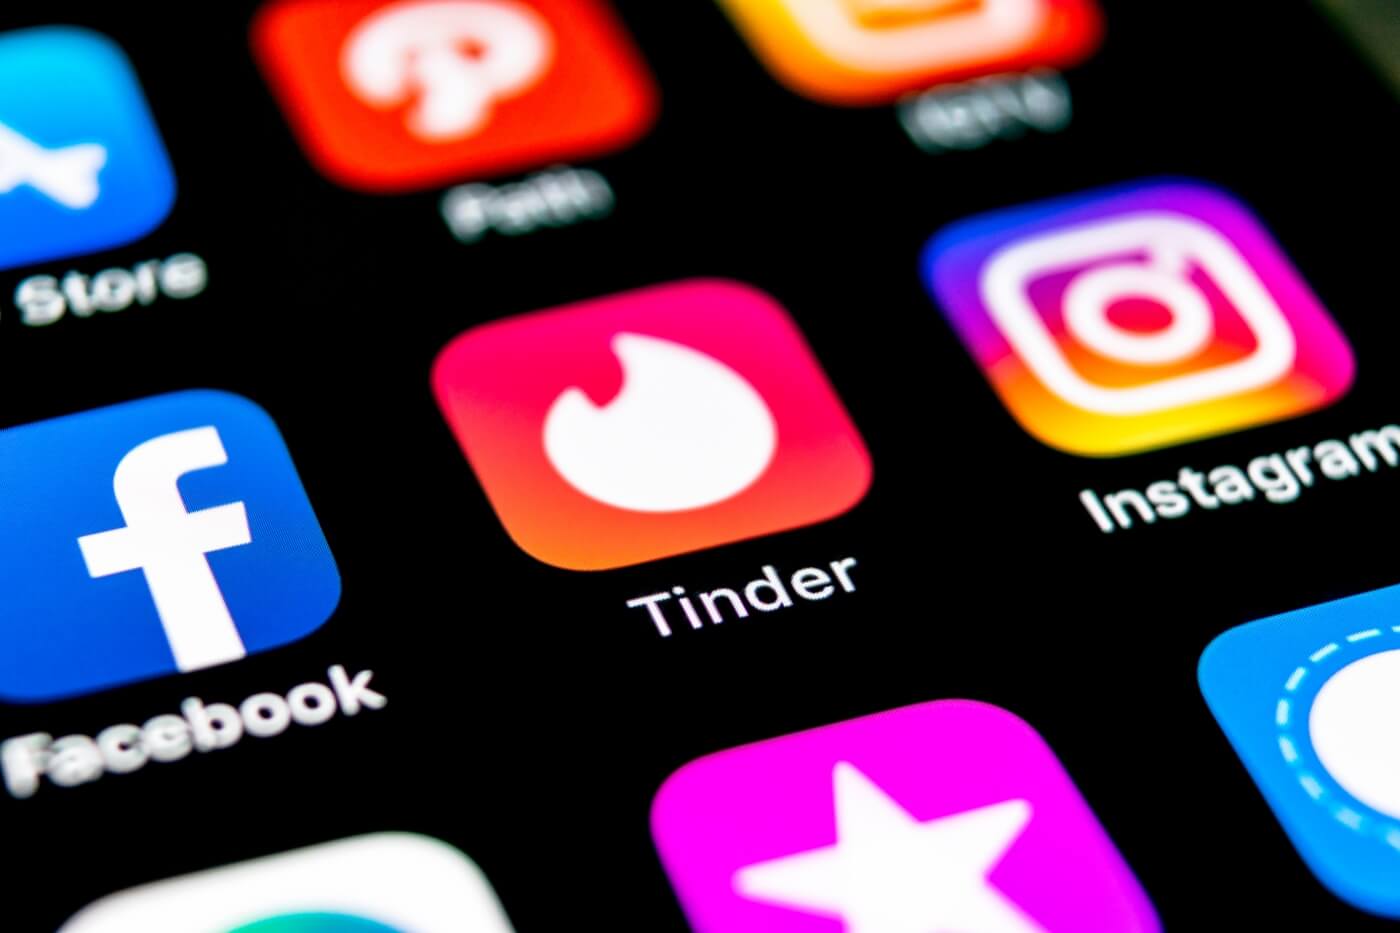 Tinder is doing more to make users feel safe when meeting new people